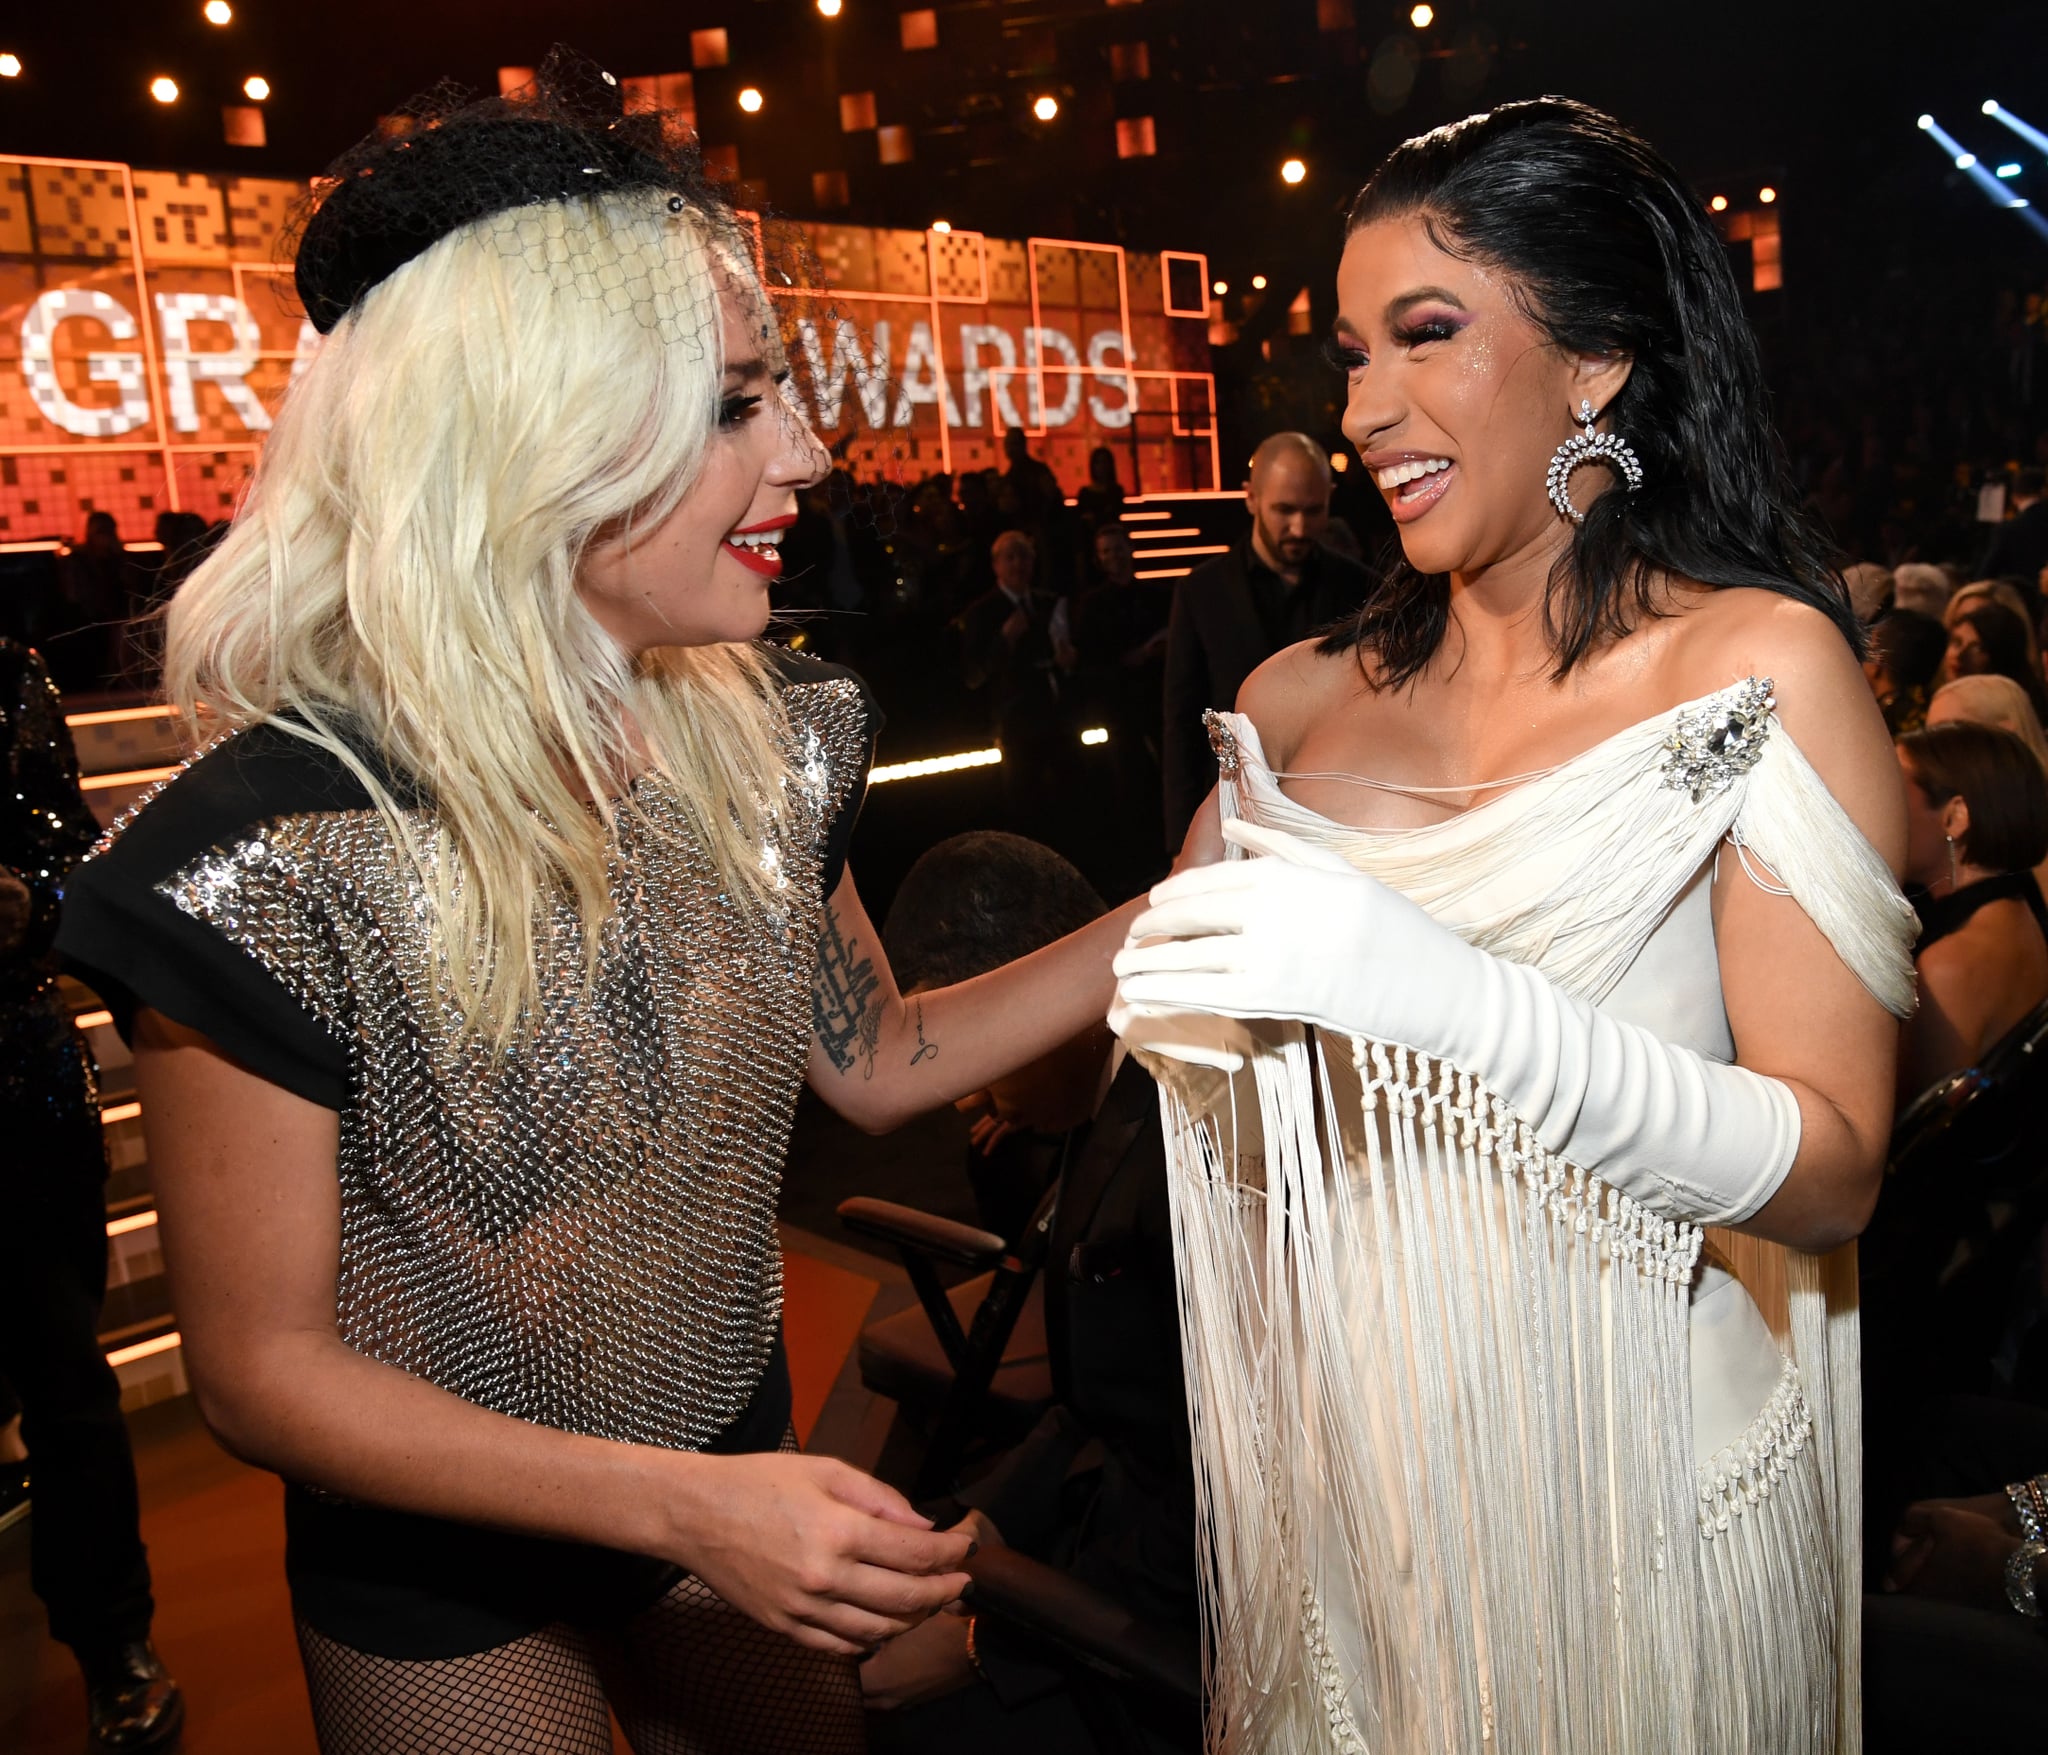 LOS ANGELES, CA - FEBRUARY 10:  Lady Gaga (L) and Cardi B during the 61st Annual GRAMMY Awards at Staples Centre on February 10, 2019 in Los Angeles, California.  (Photo by Kevin Mazur/Getty Images for The Recording Academy)